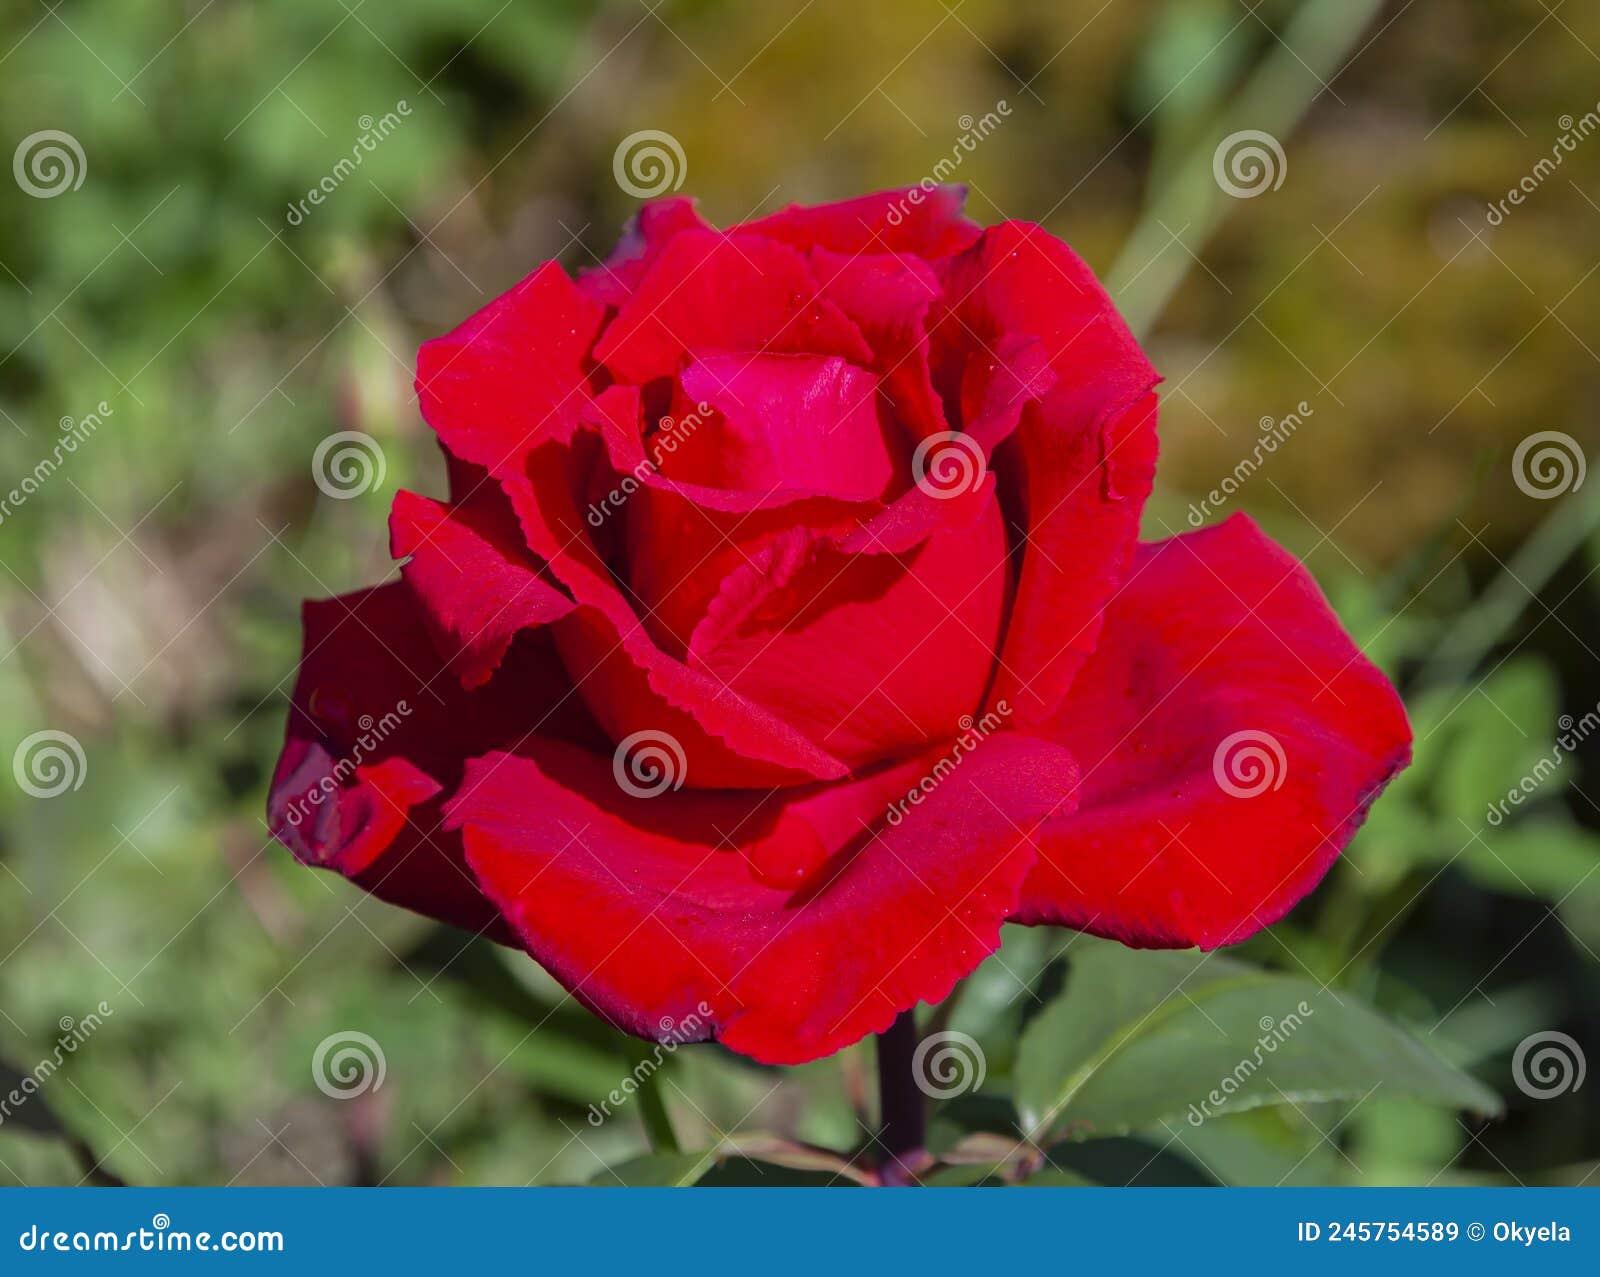 flower of bright scarlet rose of the erotica variety of tantau selection close-up